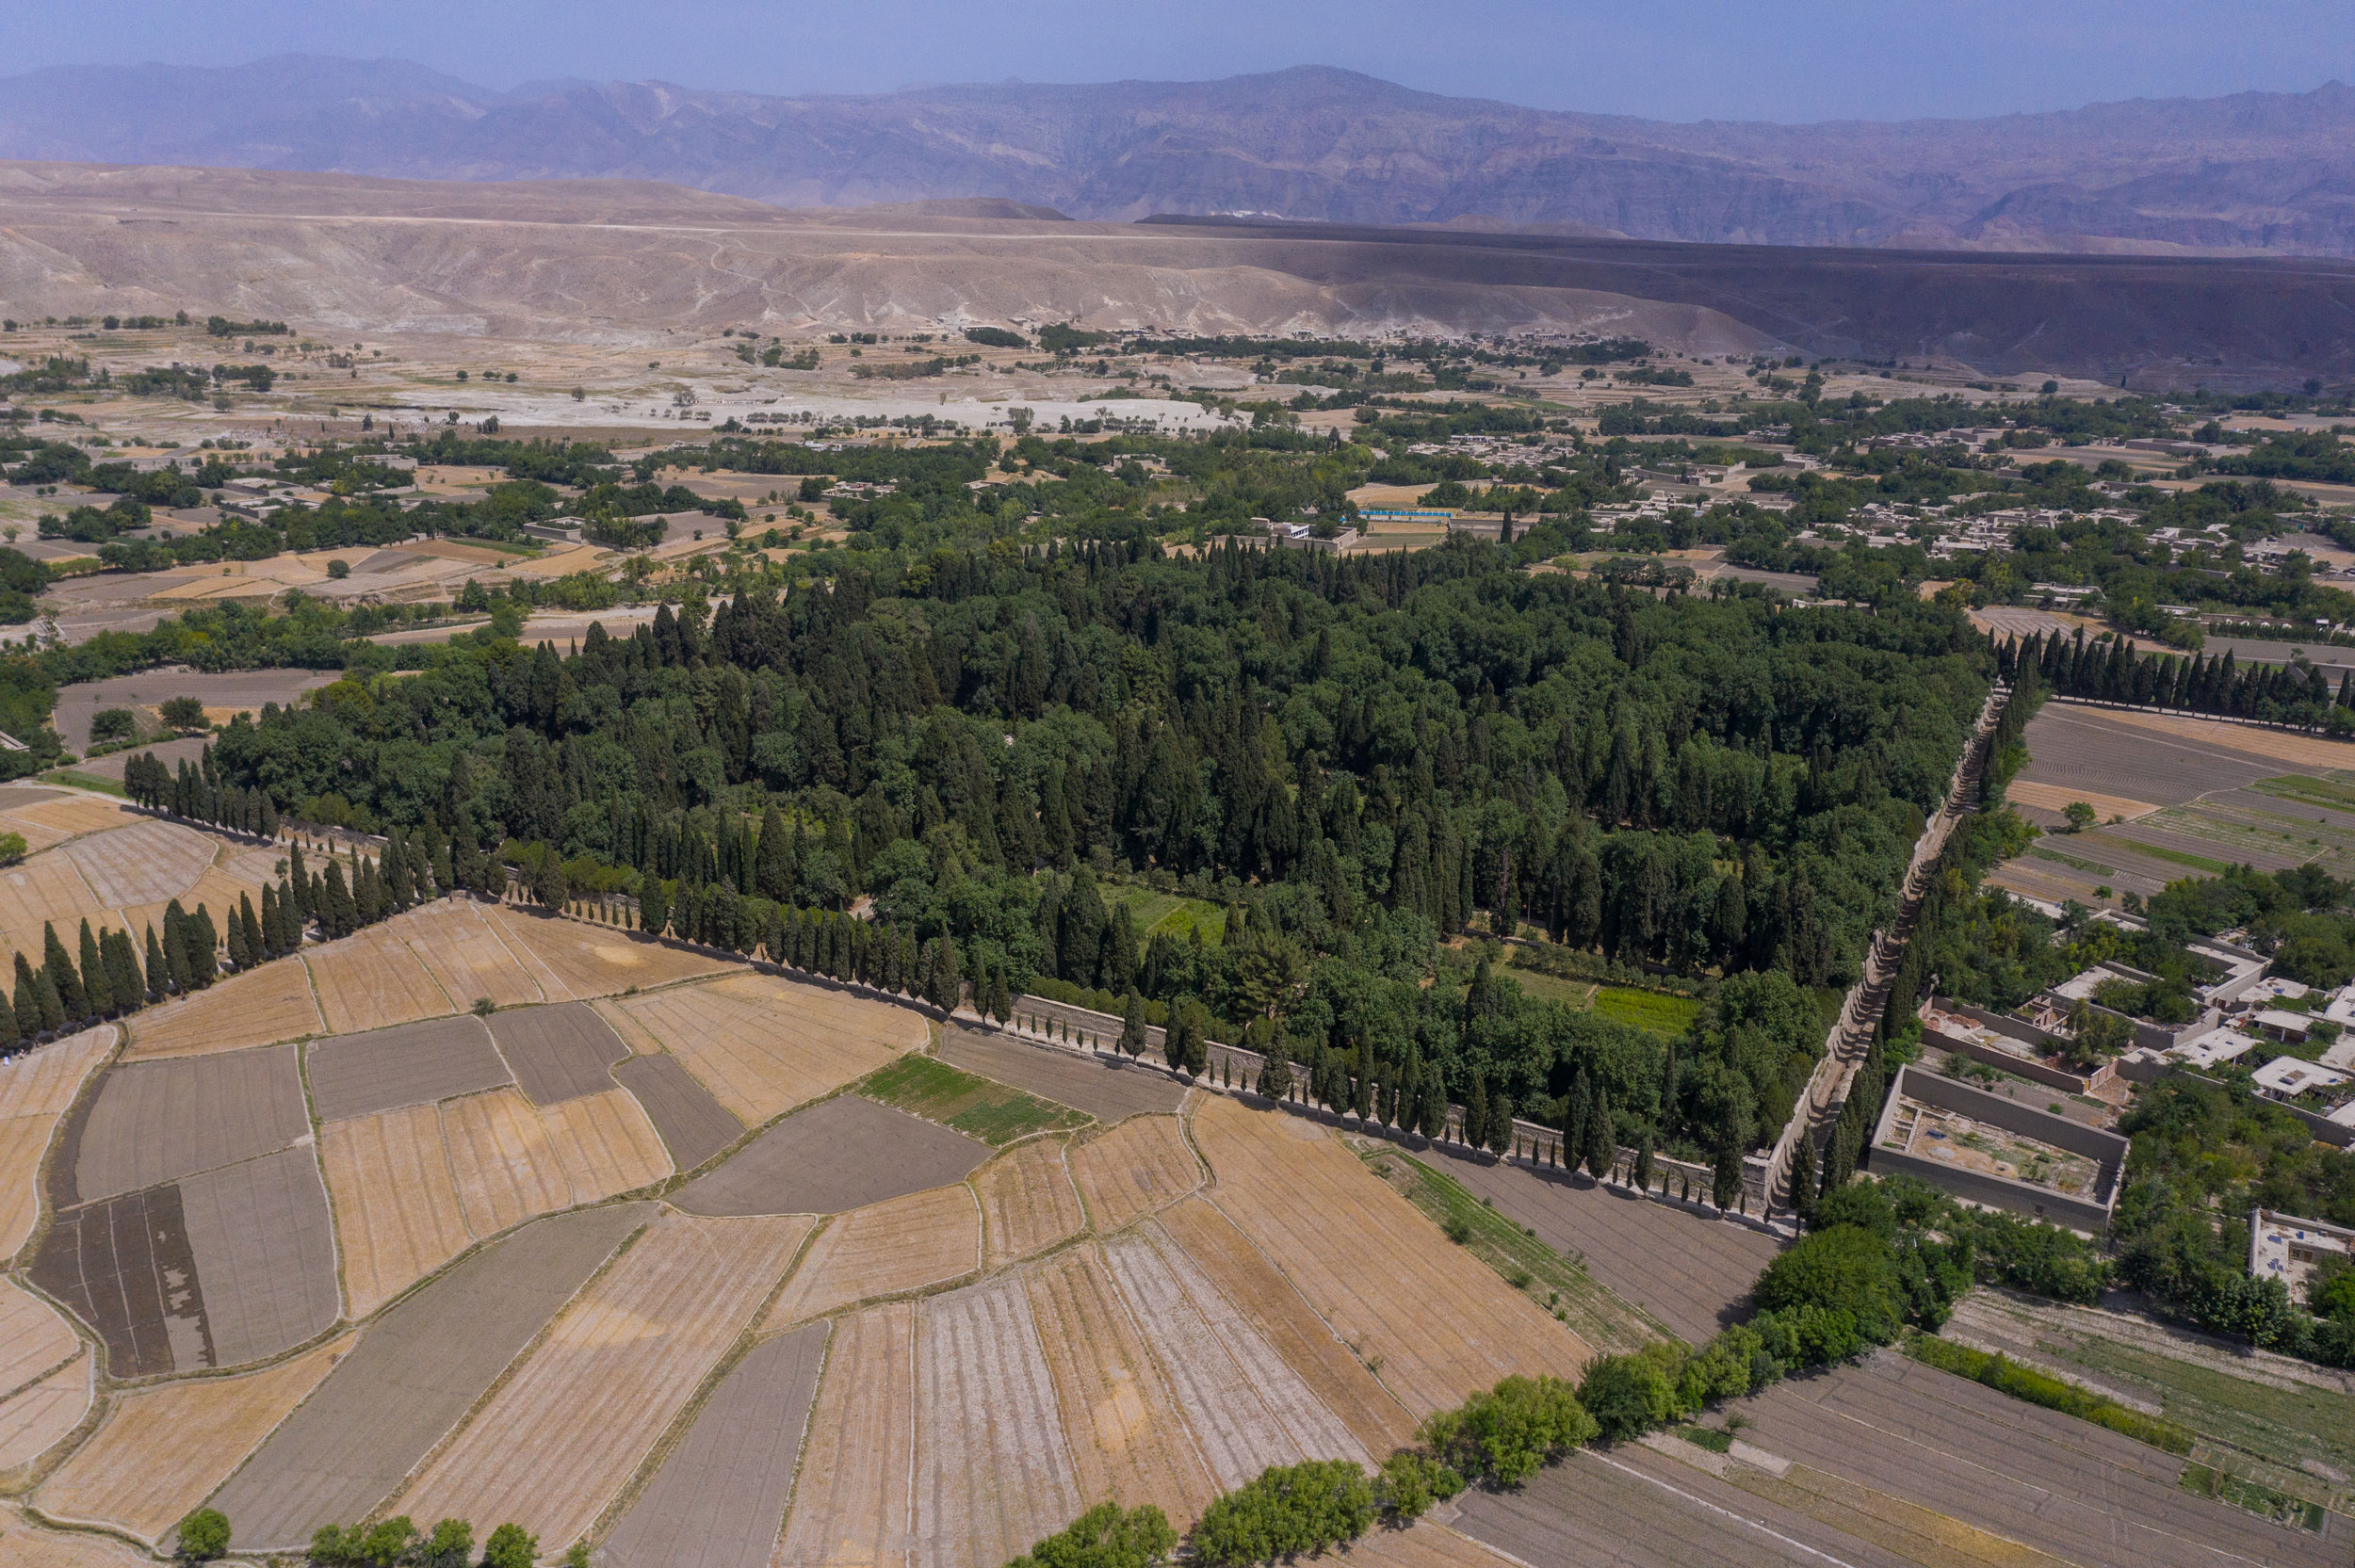 <p>Drone capture showing the garden and surrounding agricultural fields</p>